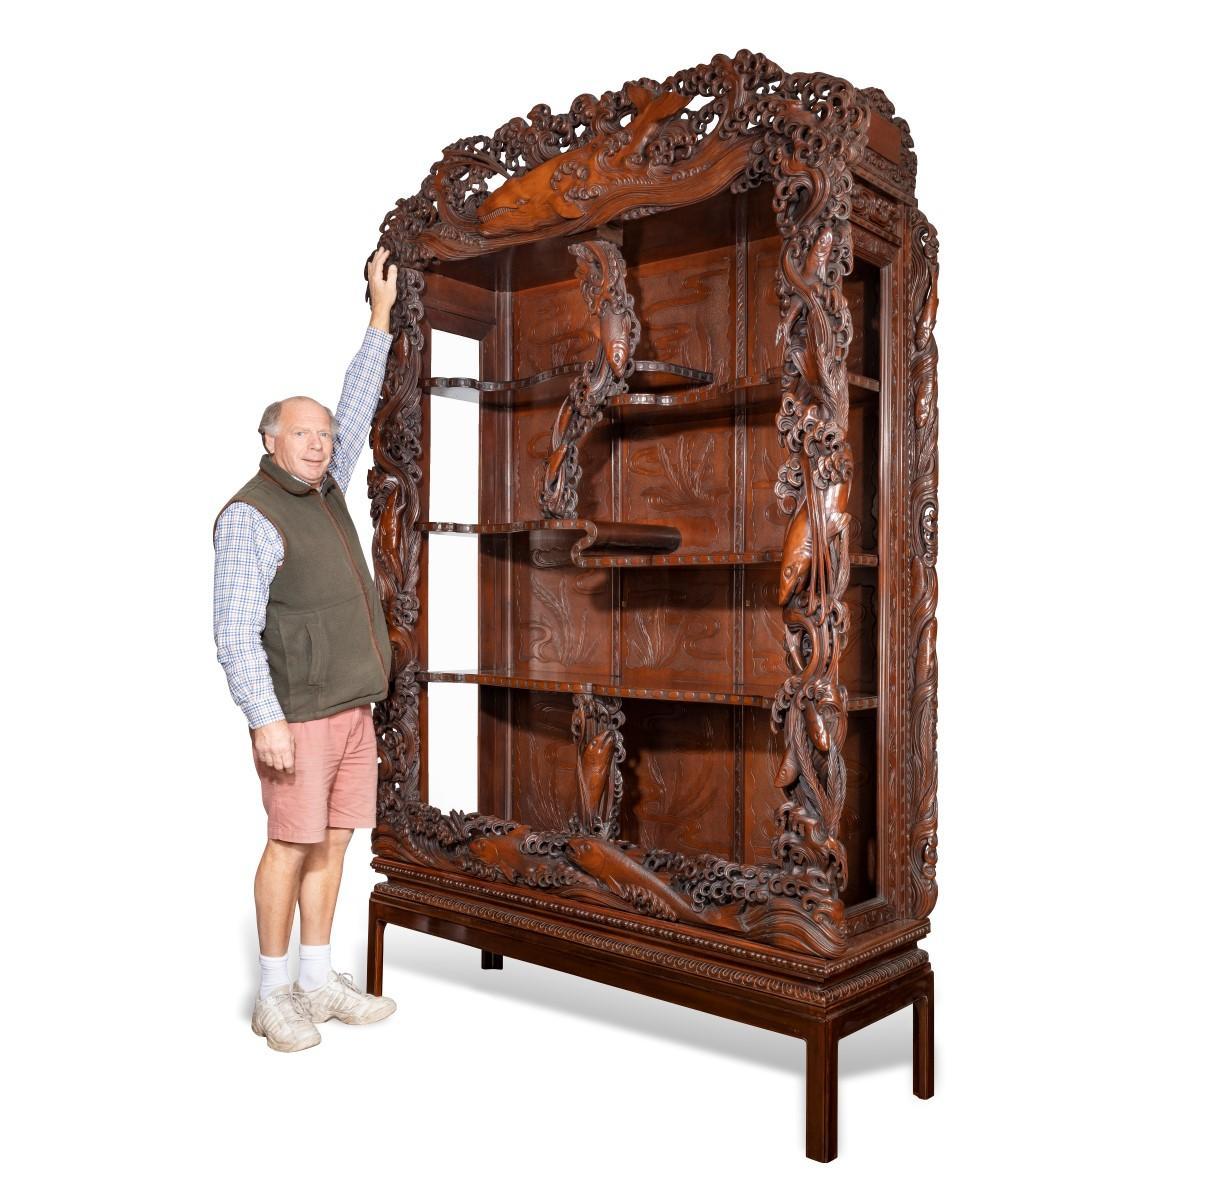 A superb monumental Meiji period hard wood display cabinet, by Noguchi of Yokahama, of rectangular form with three shelves which curl back under themselves like ripples to create an asymmetrical appearance, the ornate frame boldly carved with